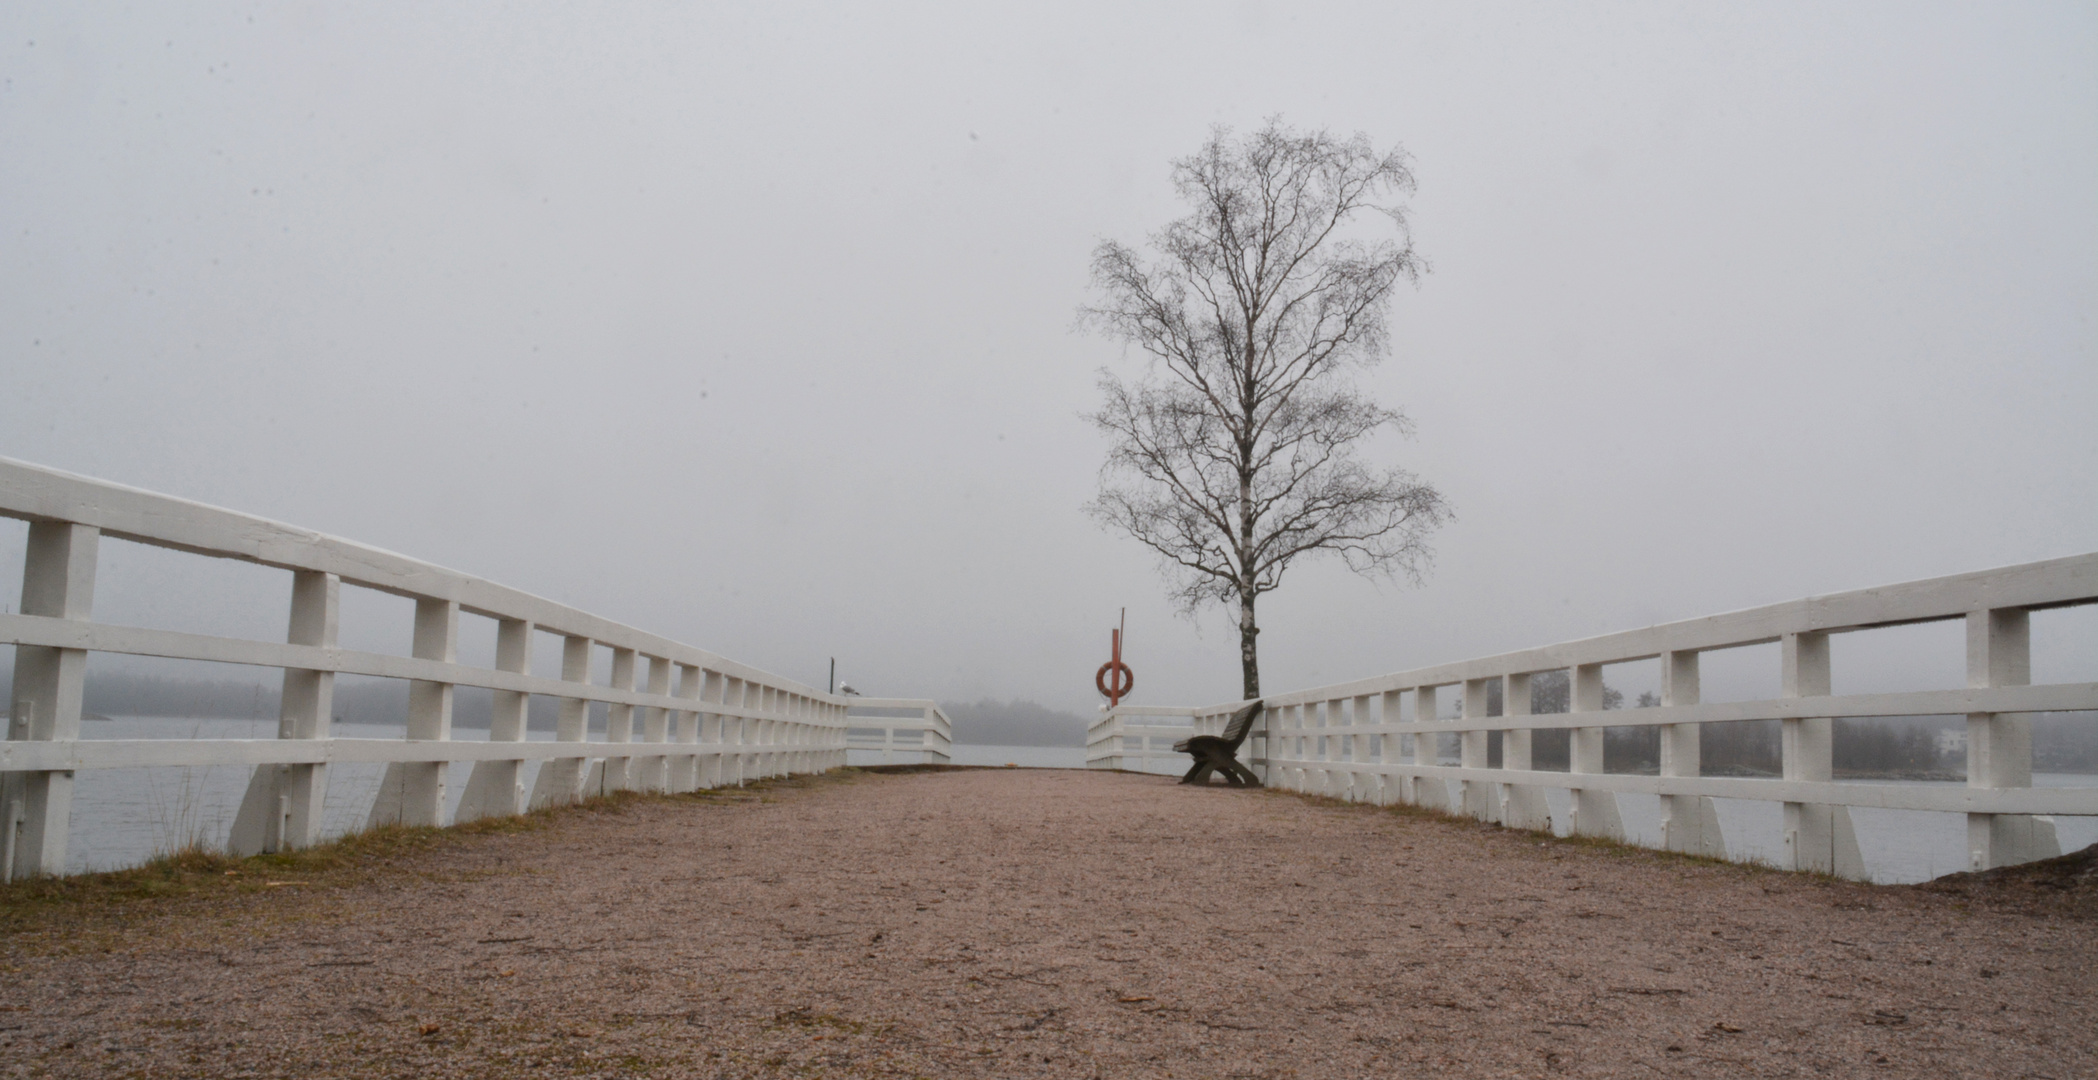 The pier and tree